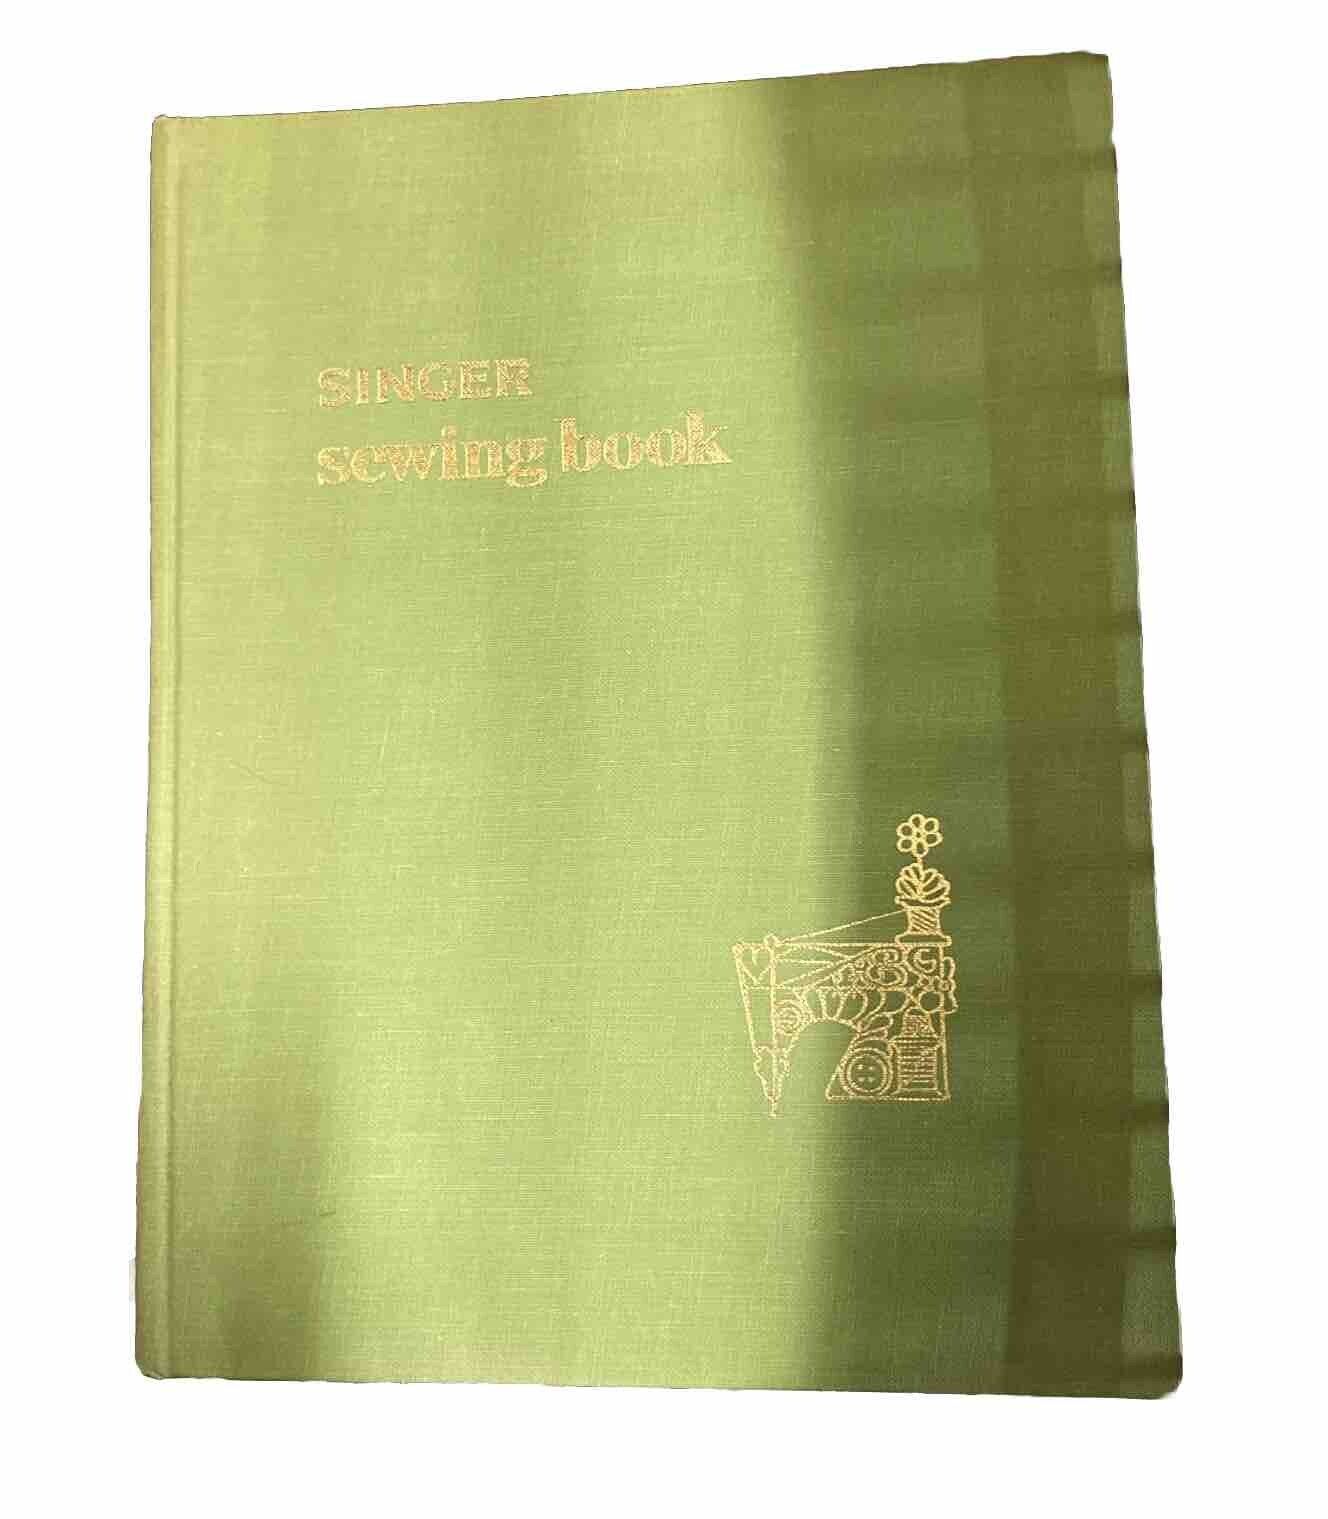 Singer Sewing Book The Complete GUIDE to SEWING Revised Edition 1972 2nd Edition